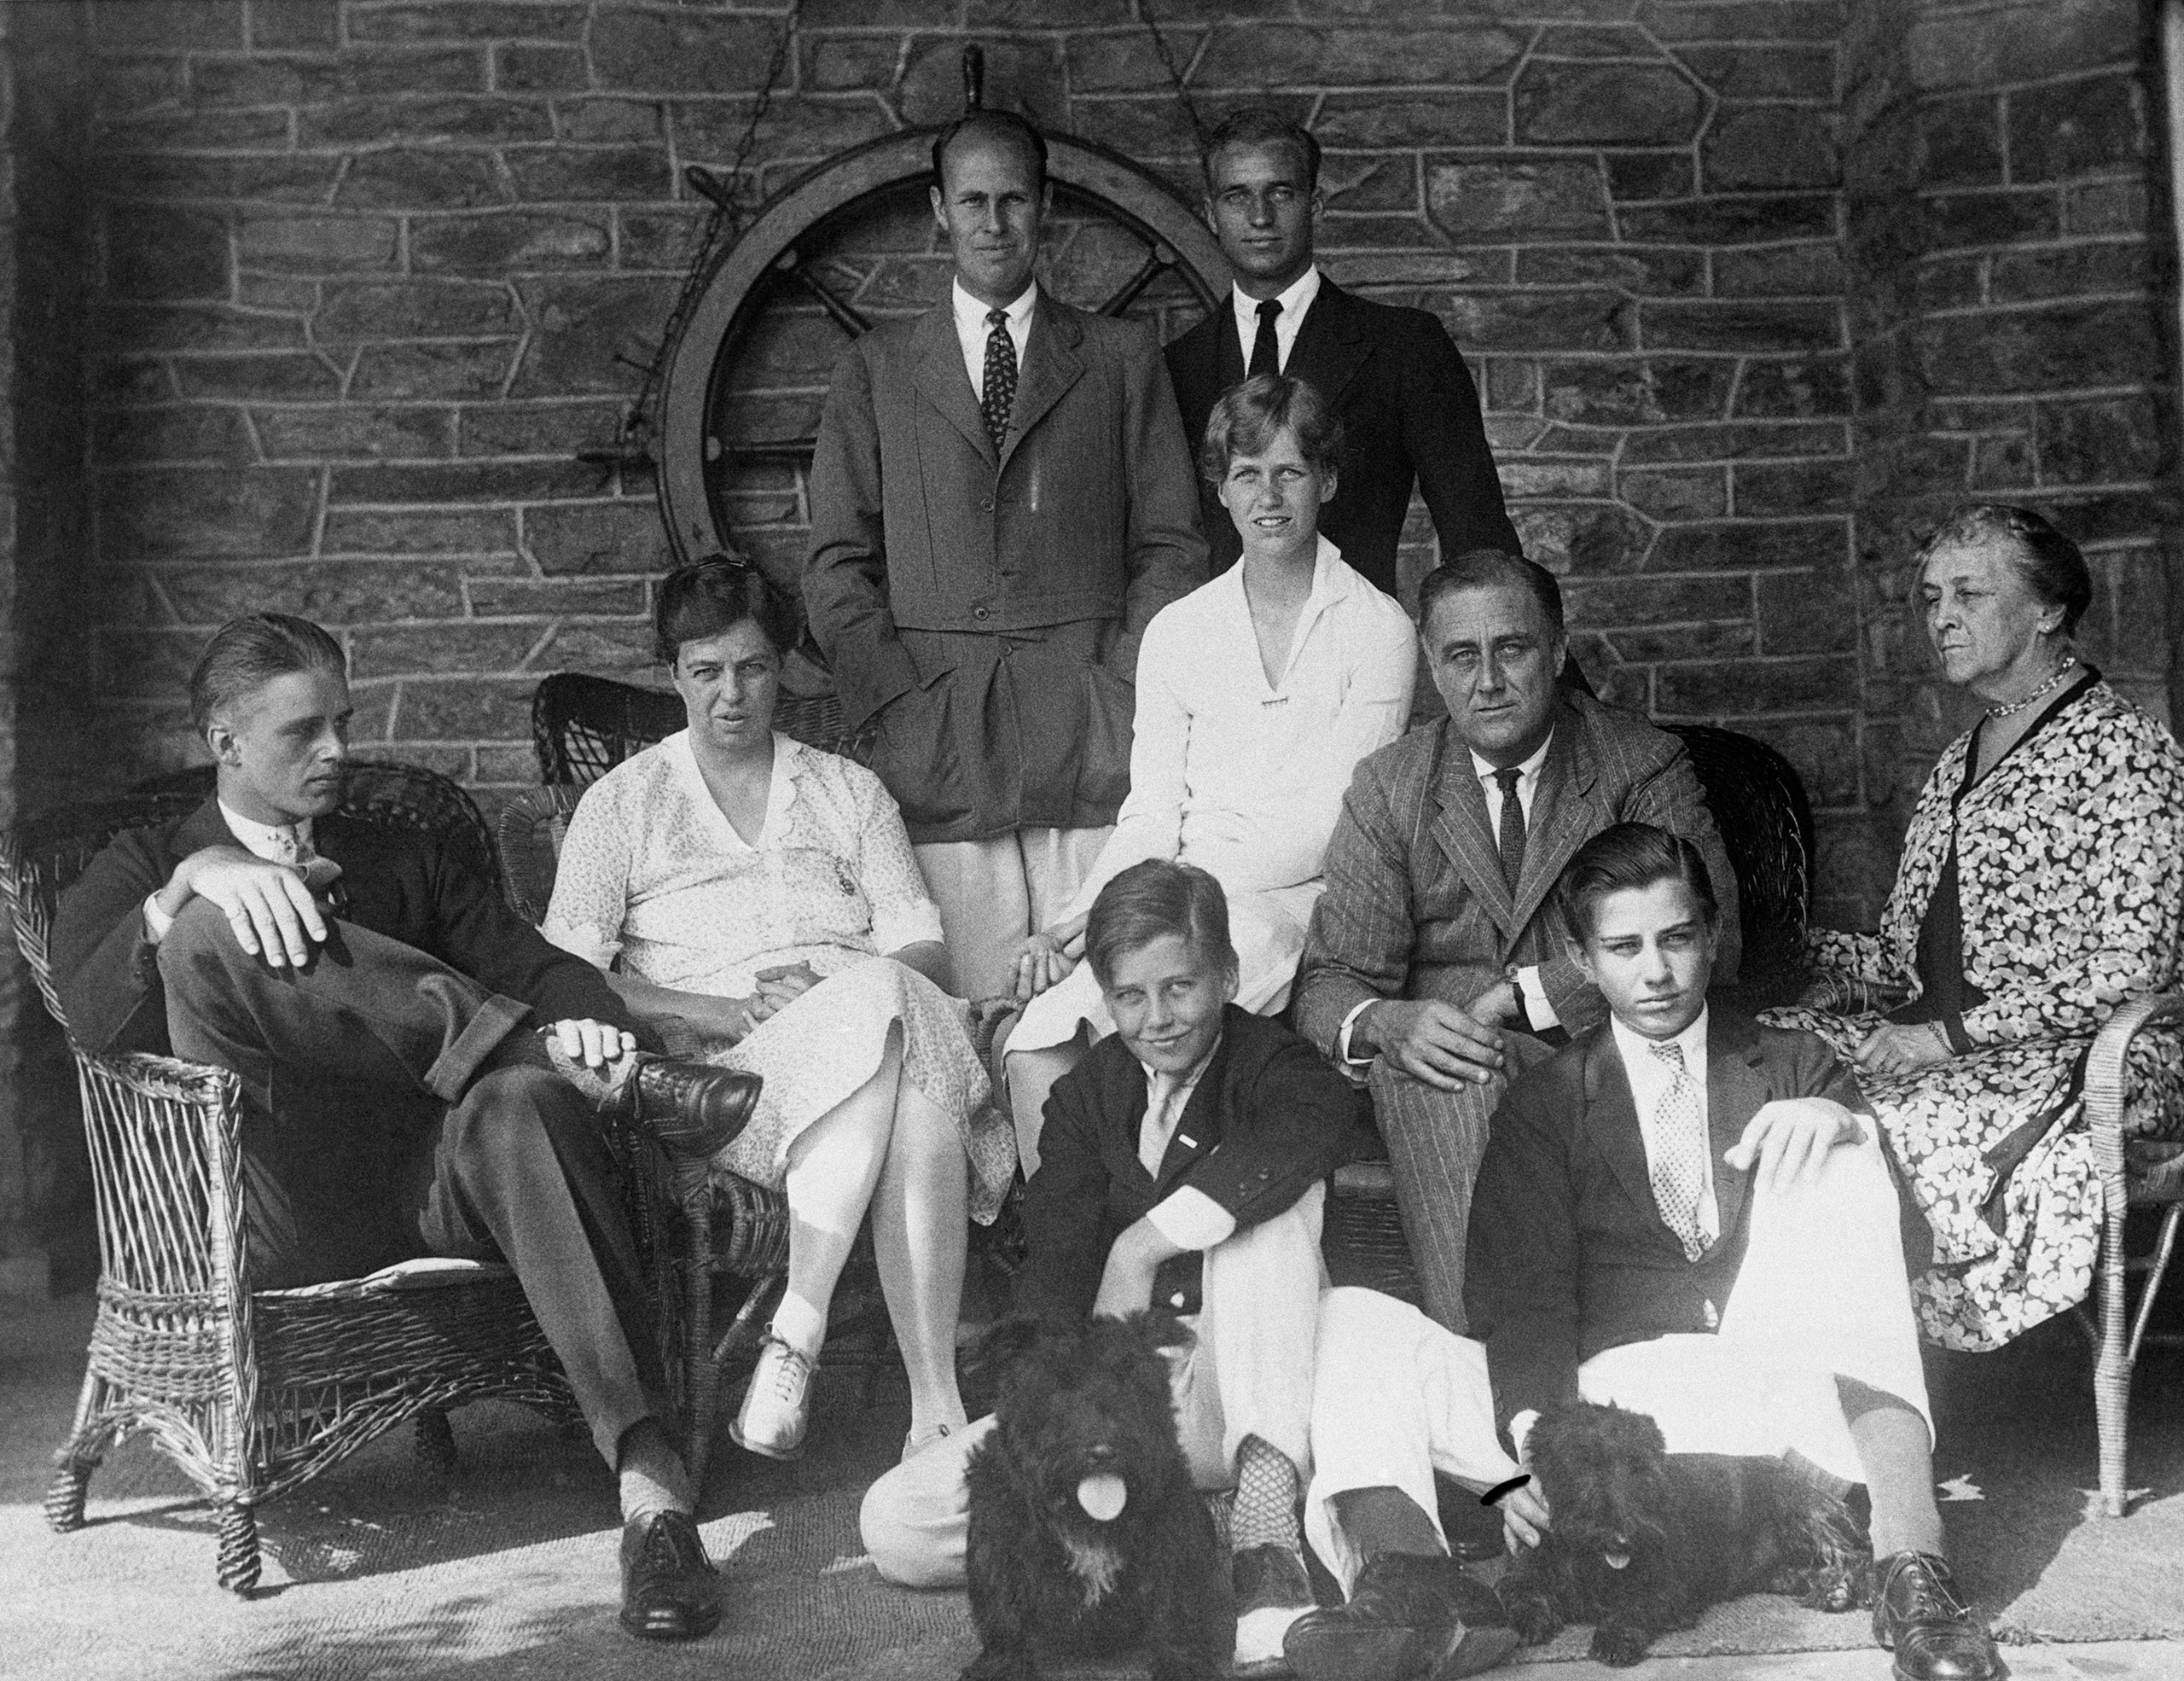 Franklin Roosevelt: F.D.R.'s slightly extended family sat for this photo in 1928, around the time when he was running for governor of New York. They are, from left: Elliott, a war hero and author; future First Lady Eleanor; Curtis Dall (husband to Anna, a journalist, who sits in front of him); John, seated, a retailer and banker; James, standing, White House secretary for his father and a six-term Congressman; future President Roosevelt; Franklin Jr., who also served in Congress; and F.D.R.'s mother Sara Delano Roosevelt. The Roosevelts also had a sixth child who died in infancy.